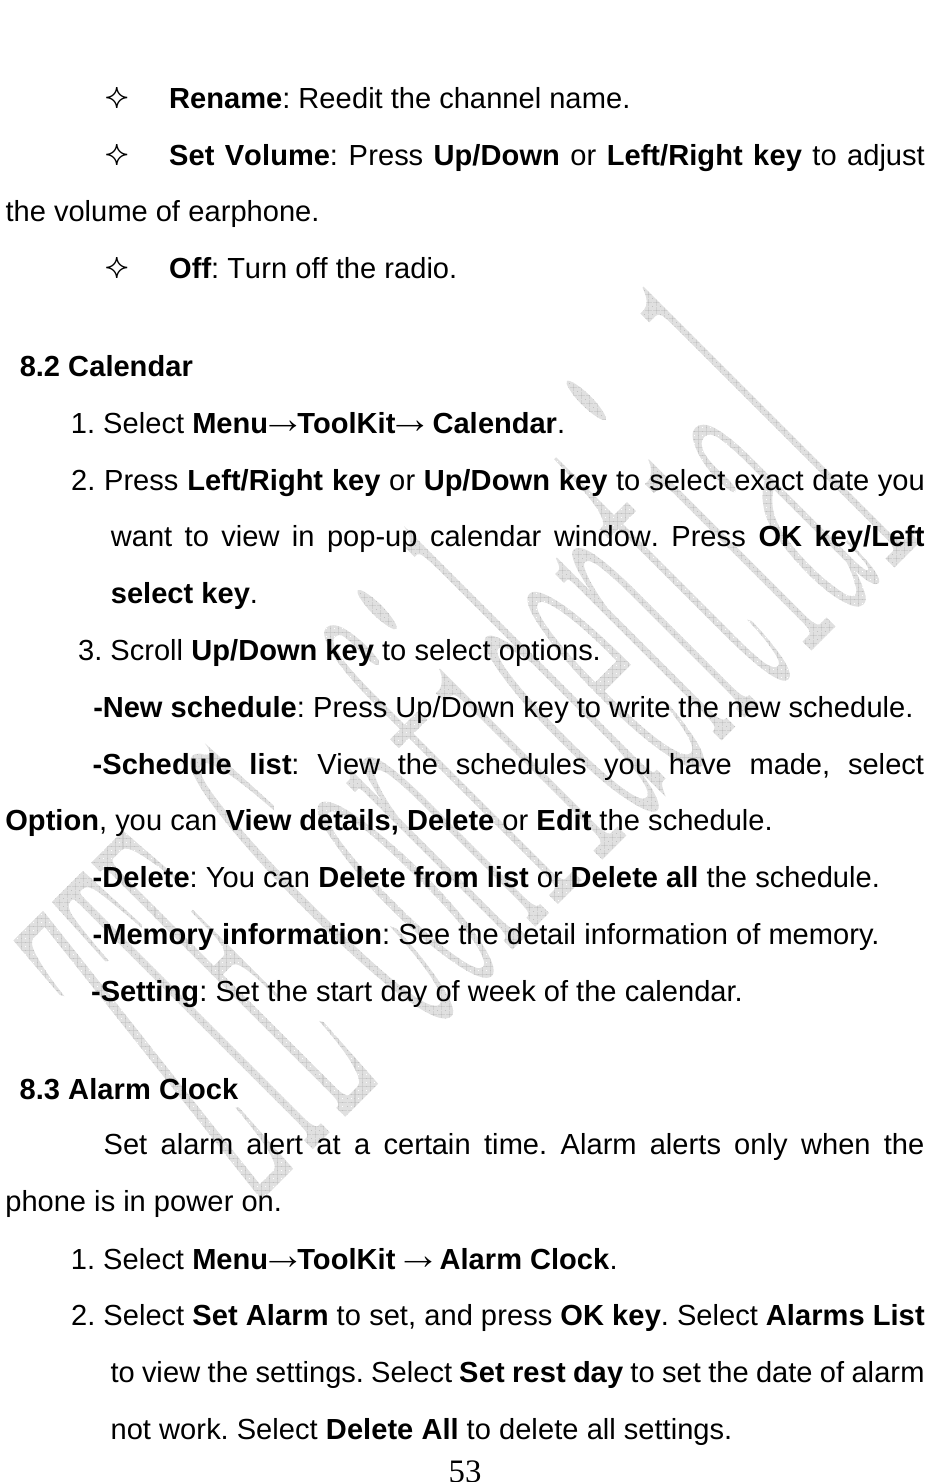                              53 Rename: Reedit the channel name.  Set Volume: Press Up/Down or Left/Right key to adjust the volume of earphone.  Off: Turn off the radio. 8.2 Calendar 1. Select Menu→ToolKit→ Calendar. 2. Press Left/Right key or Up/Down key to select exact date you want to view in pop-up calendar window. Press OK key/Left select key. 3. Scroll Up/Down key to select options.  -New schedule: Press Up/Down key to write the new schedule. -Schedule list: View the schedules you have made, select Option, you can View details, Delete or Edit the schedule. -Delete: You can Delete from list or Delete all the schedule. -Memory information: See the detail information of memory. -Setting: Set the start day of week of the calendar.   8.3 Alarm Clock Set alarm alert at a certain time. Alarm alerts only when the phone is in power on.  1. Select Menu→ToolKit → Alarm Clock. 2. Select Set Alarm to set, and press OK key. Select Alarms List to view the settings. Select Set rest day to set the date of alarm not work. Select Delete All to delete all settings.     